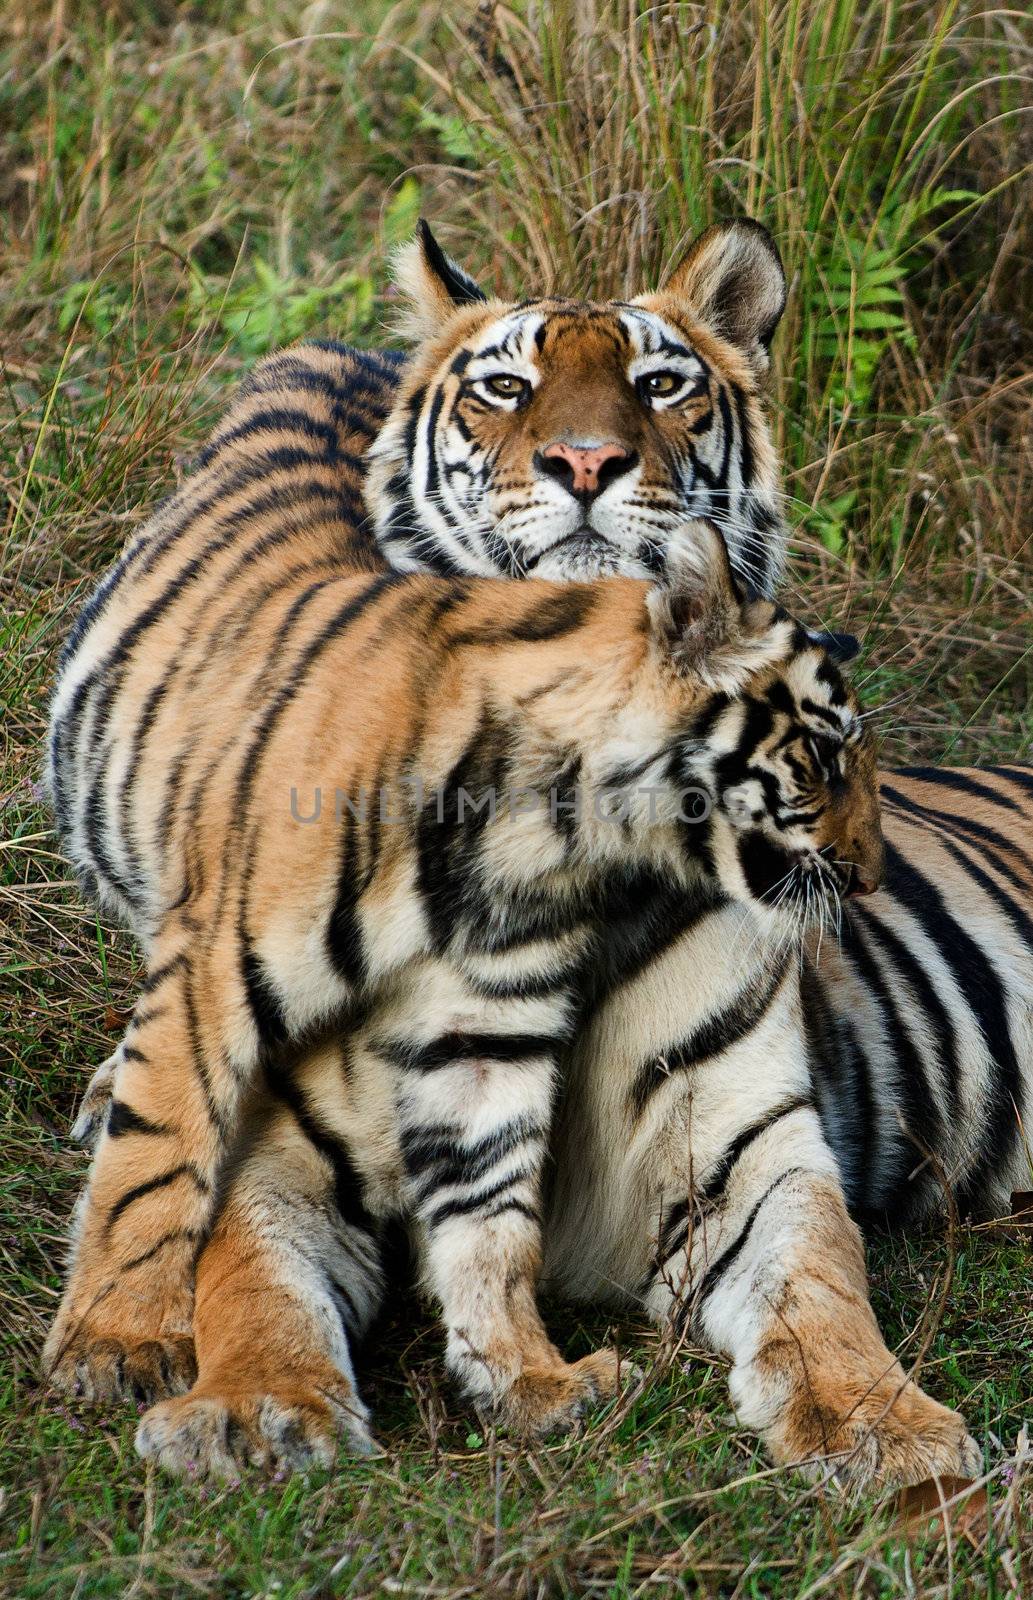 India. Bandhavgarh National Park. Tigress with a kitten on a grass.